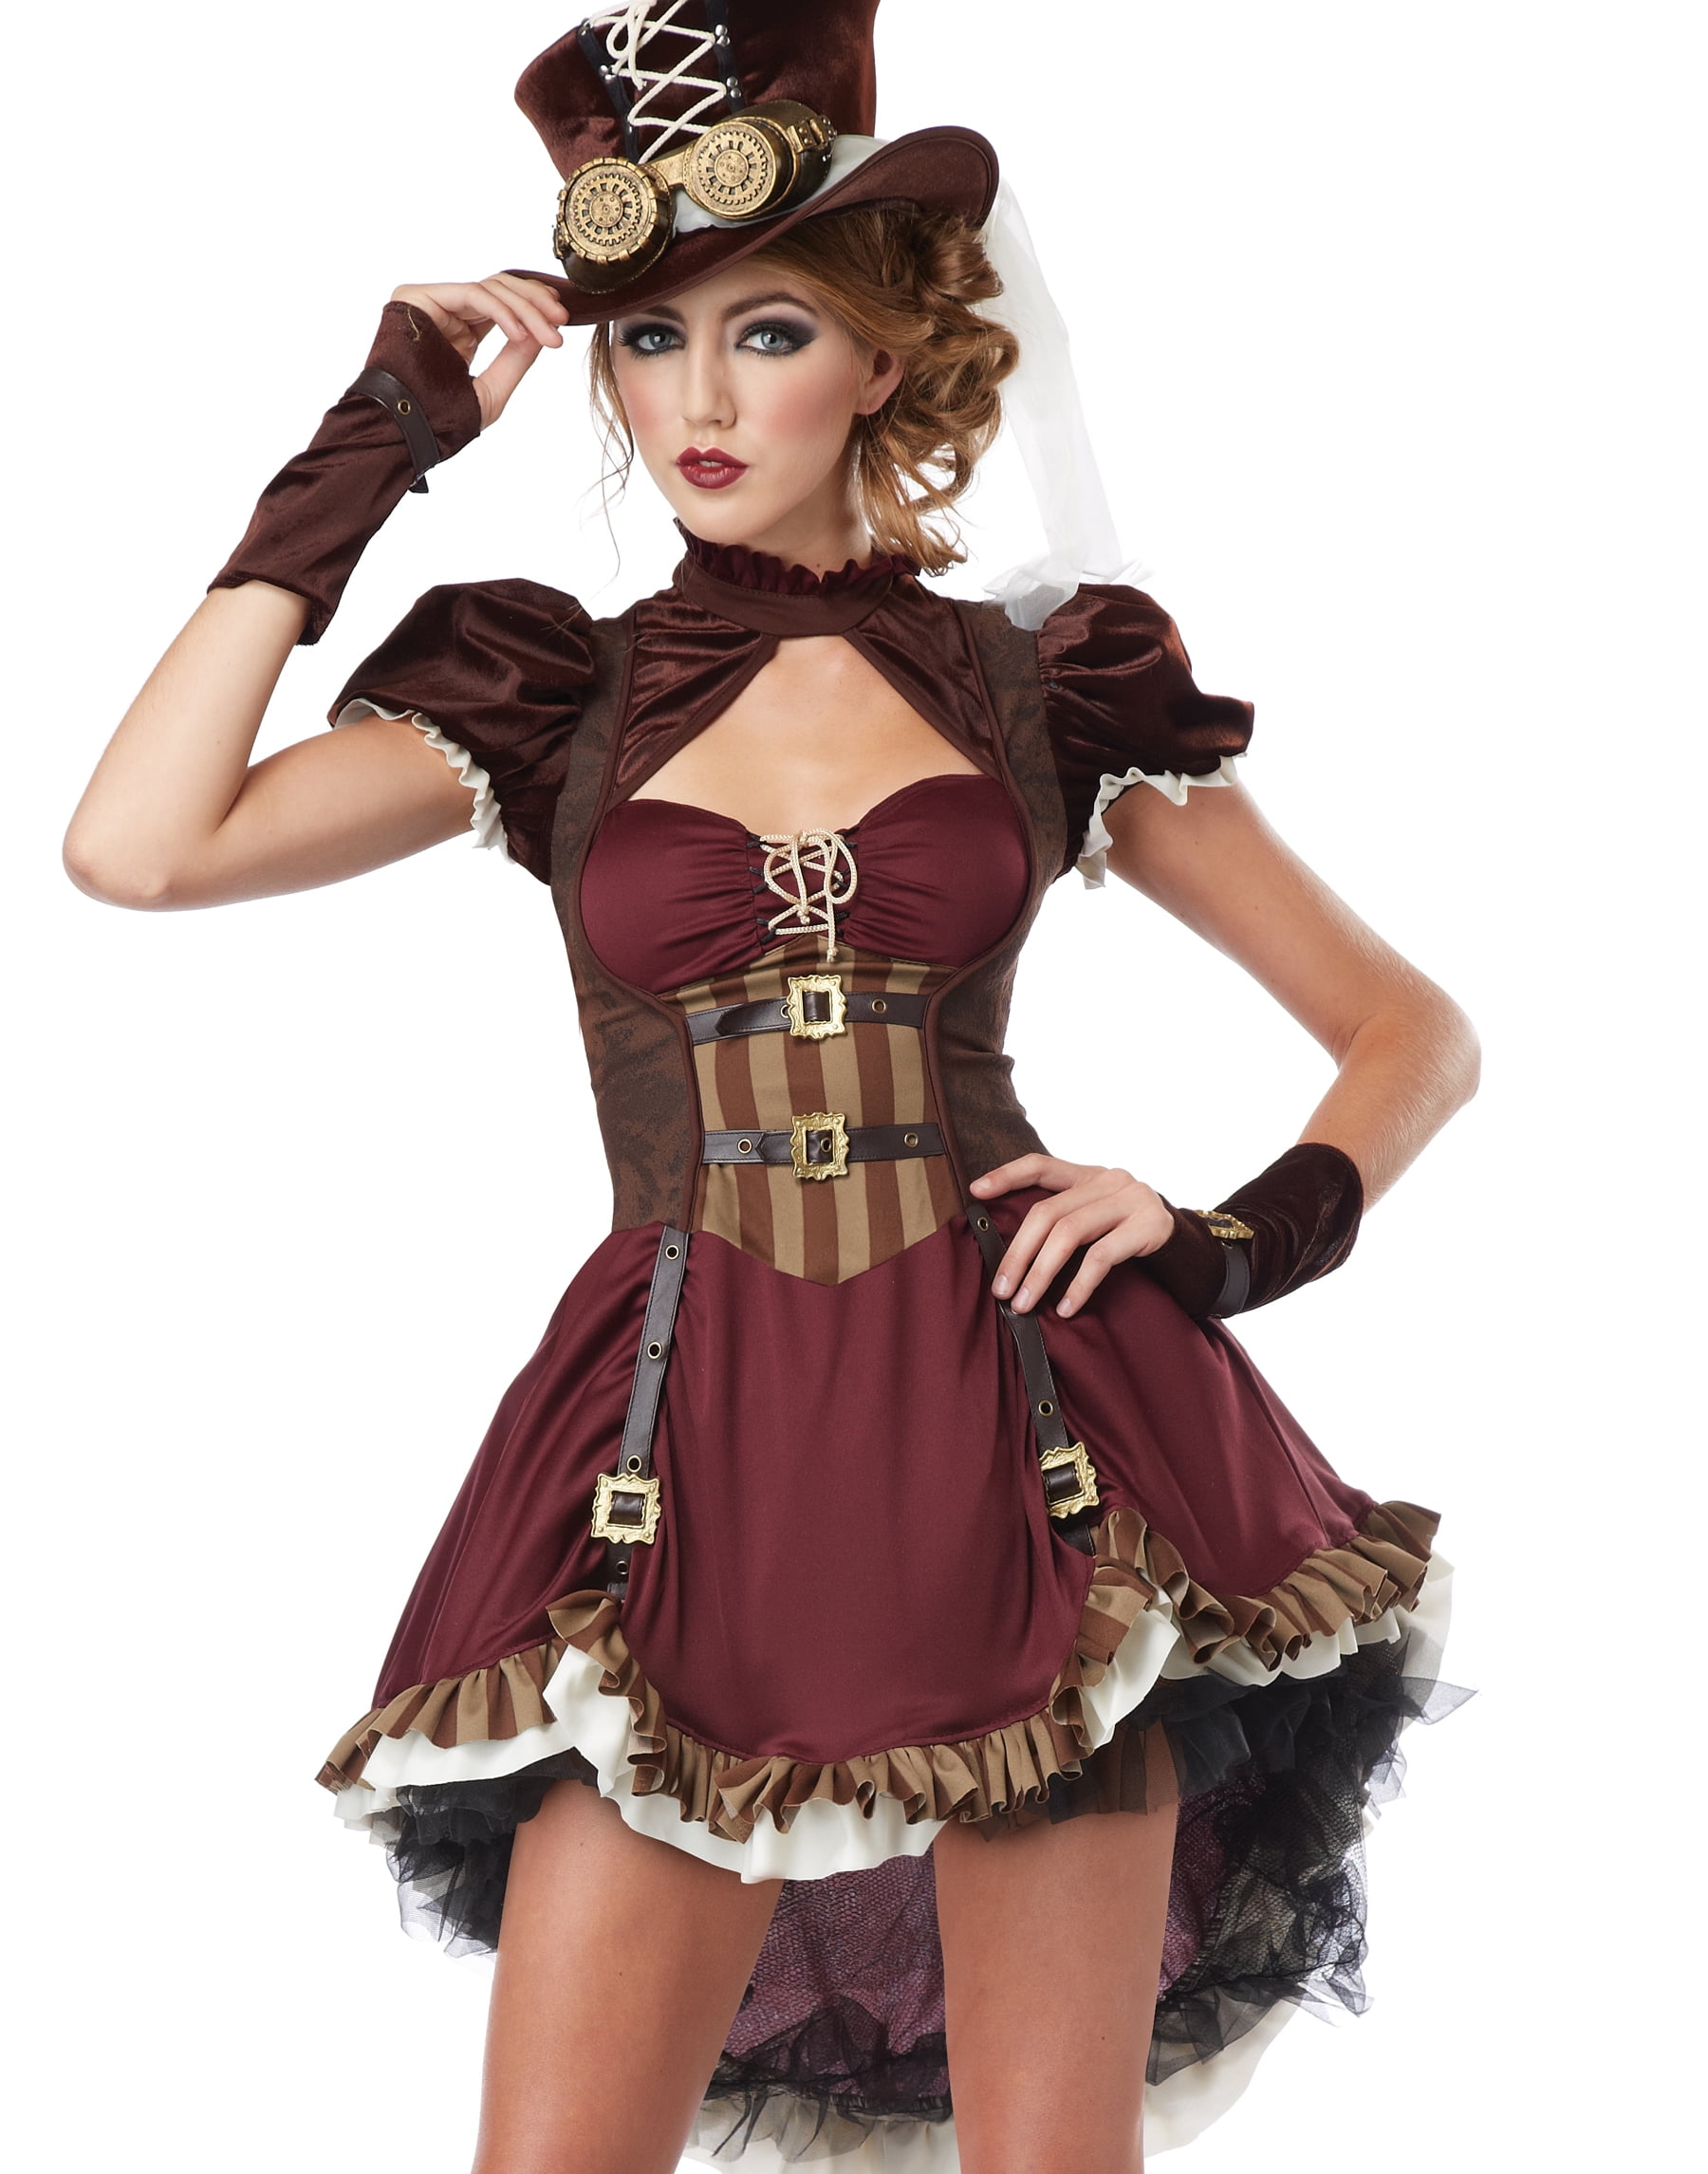 Steampunk Girl - Woman's Costume by California Costumes (01281) 